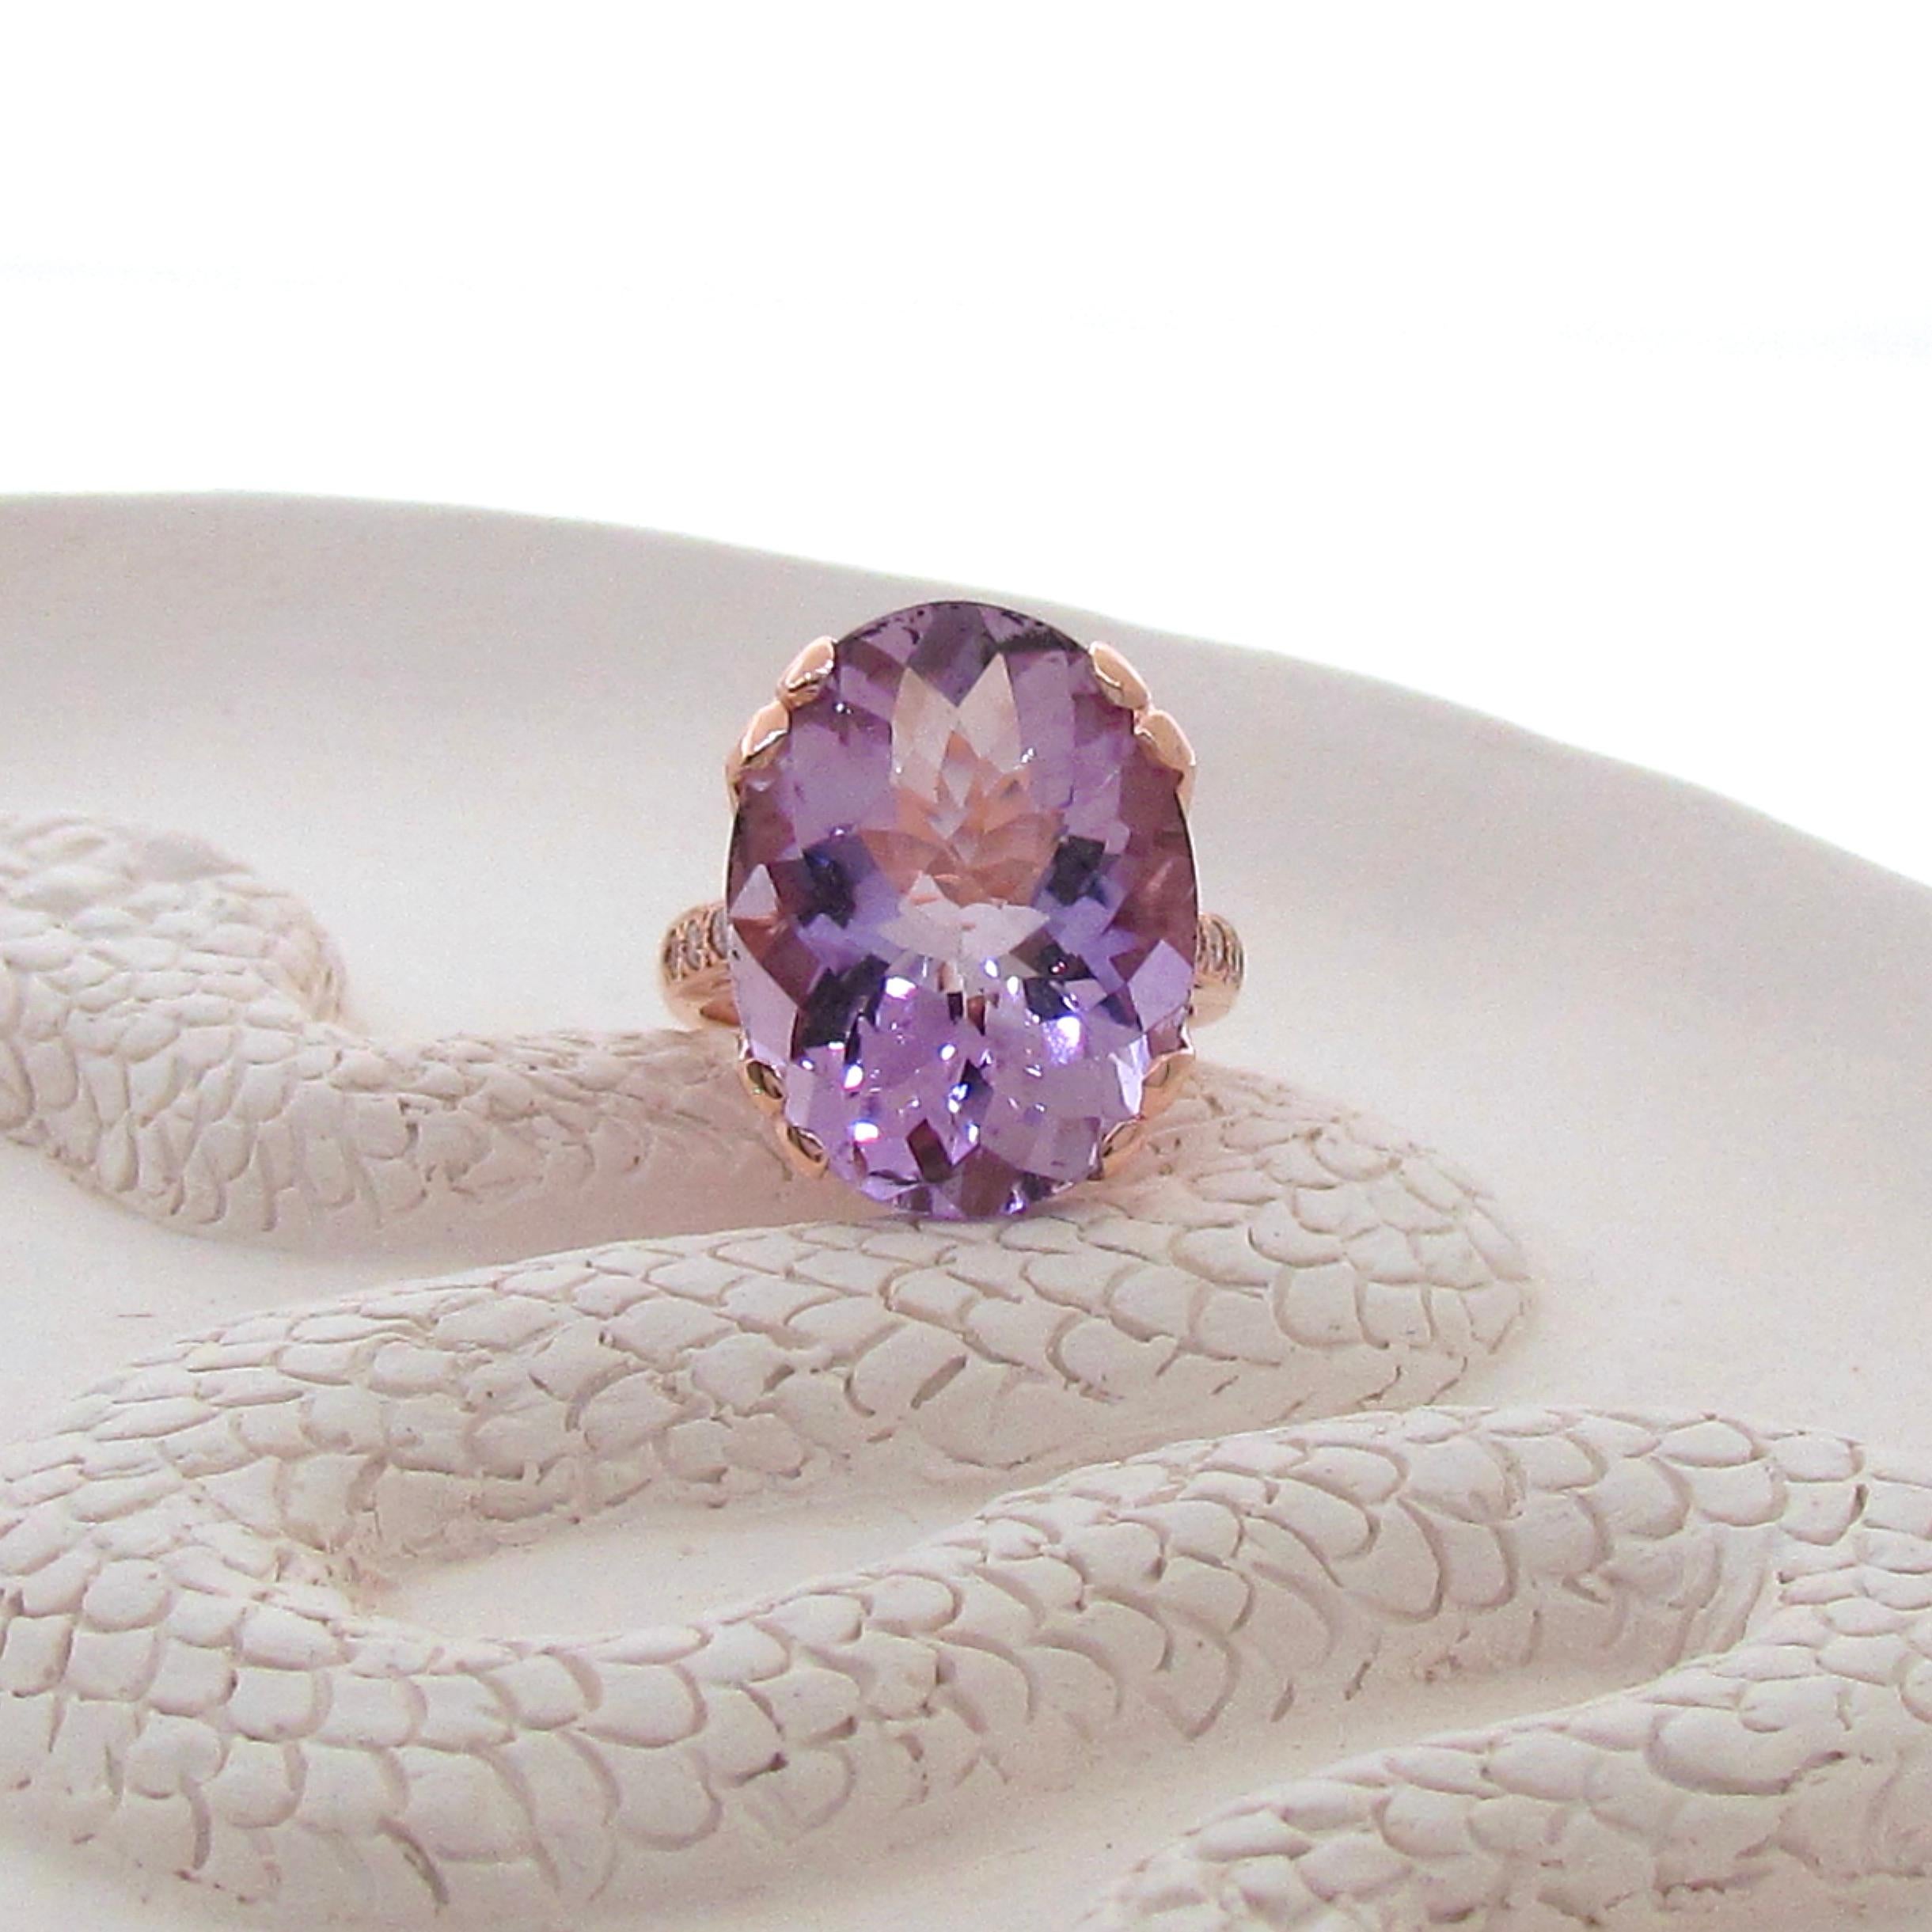 Elevate your style with our 9ct Rose Gold Diamond Faceted Amethyst Crown Ring. The breathtaking amethyst stone is expertly faceted and set in a crown-like design, and accented with shimmering diamonds. The warm tones of the rose gold band complement